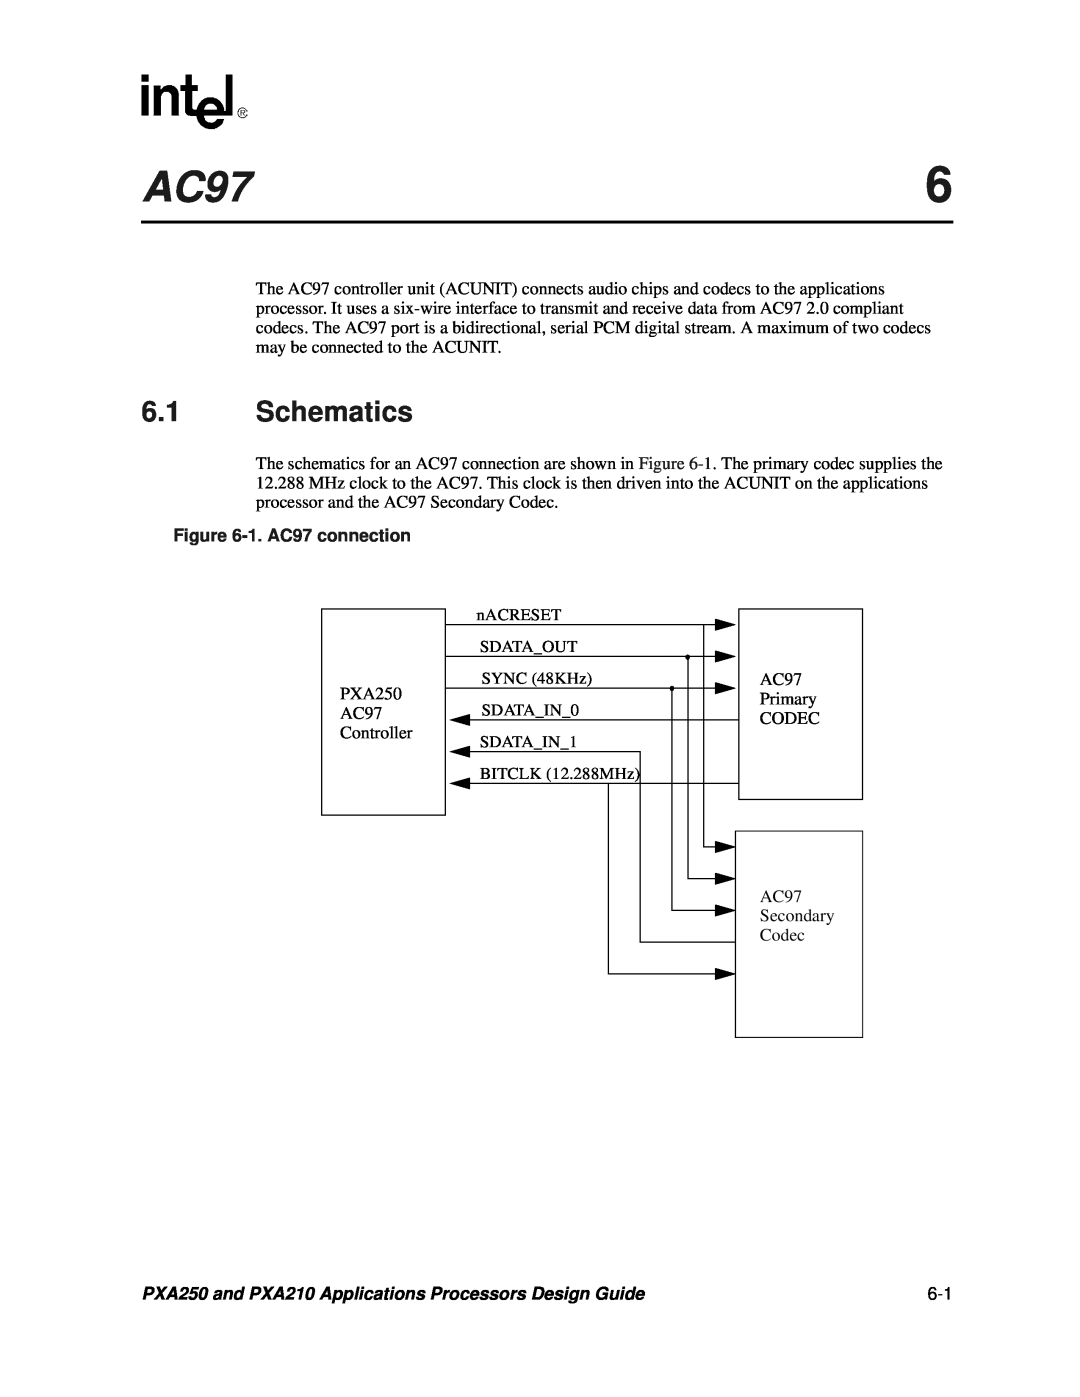 Intel manual Schematics, 1. AC97 connection, PXA250 and PXA210 Applications Processors Design Guide 